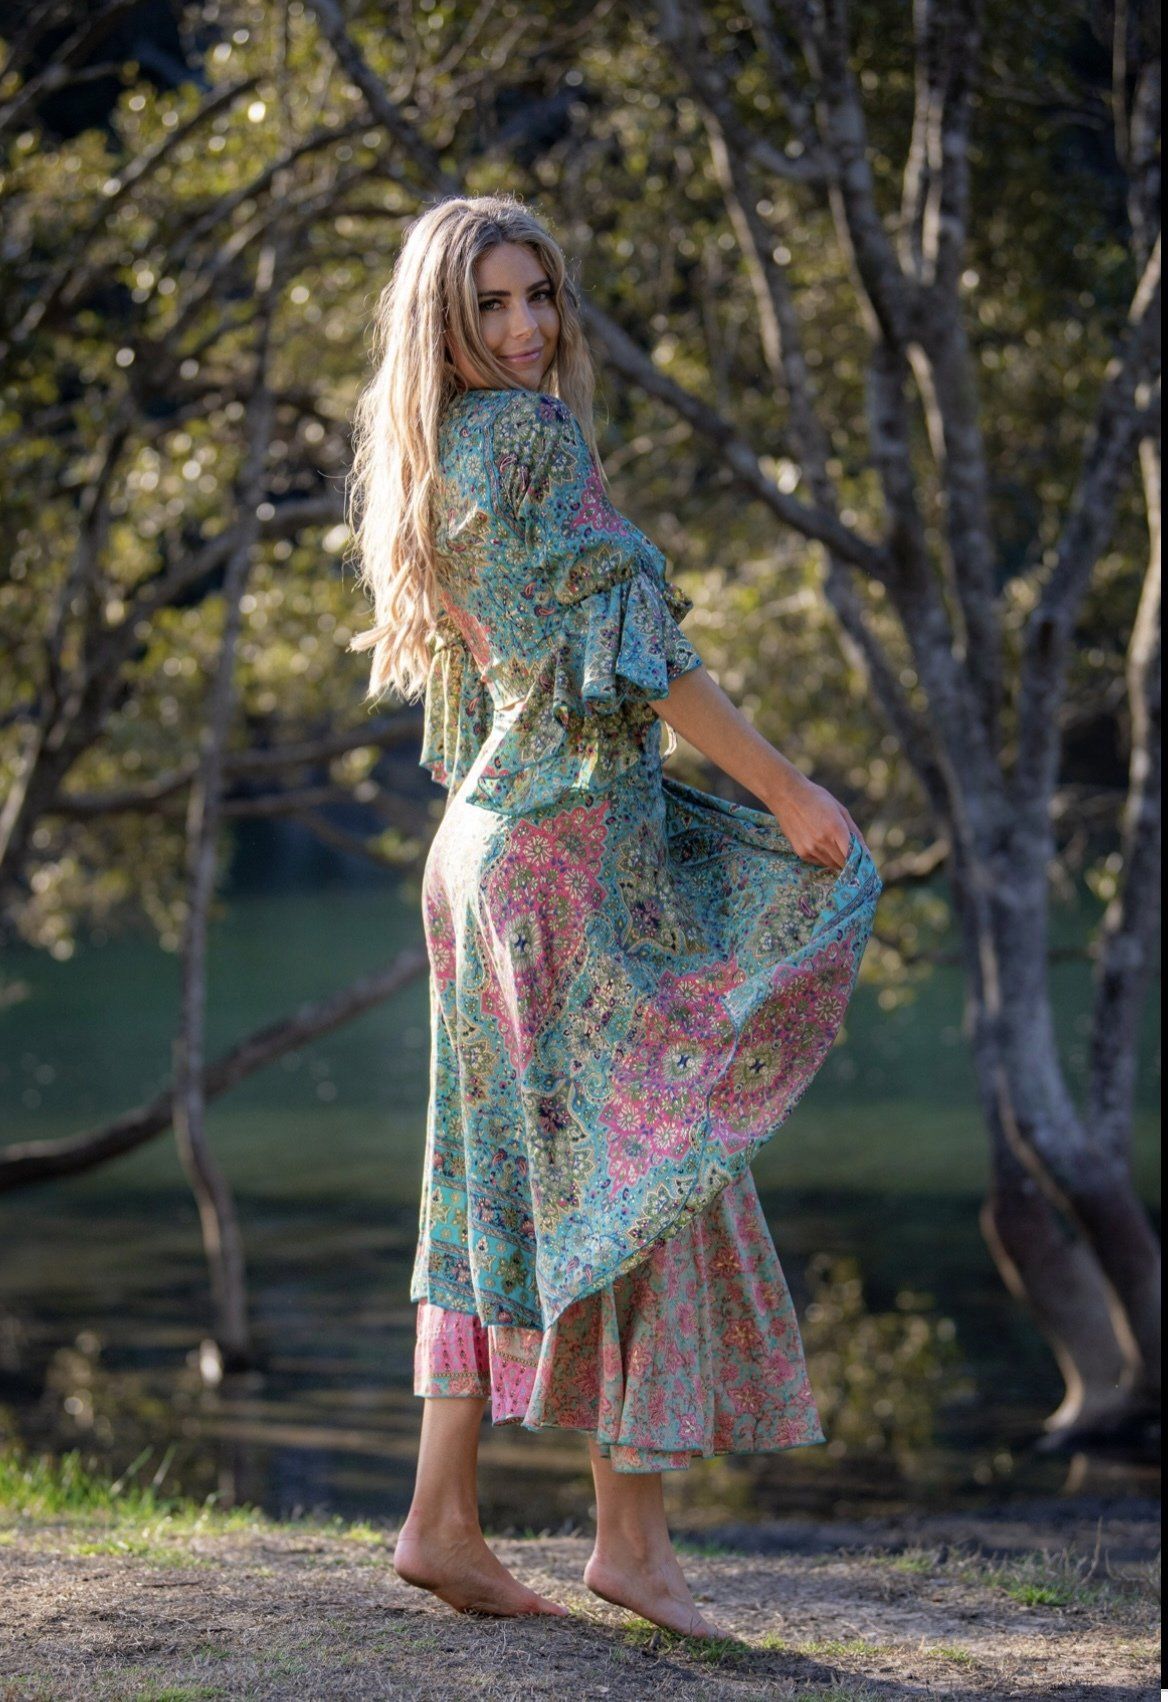 Pink and Aqua Dress with Blonde Model in Straw Hat  — Fashion Dresses in Sunshine Coast, QLD